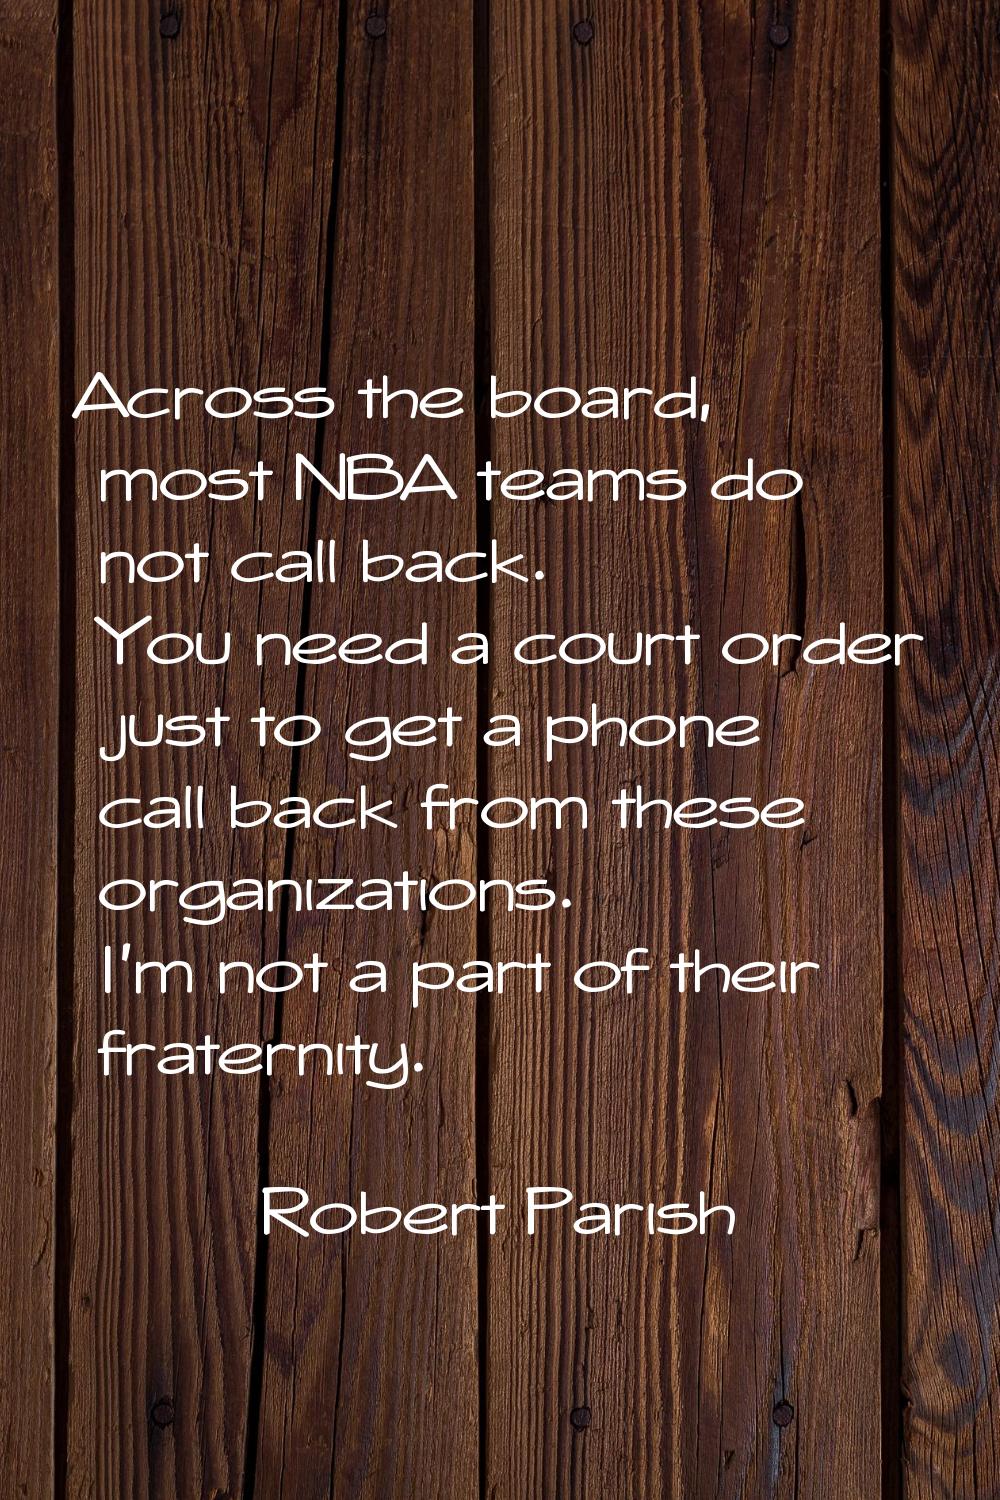 Across the board, most NBA teams do not call back. You need a court order just to get a phone call 